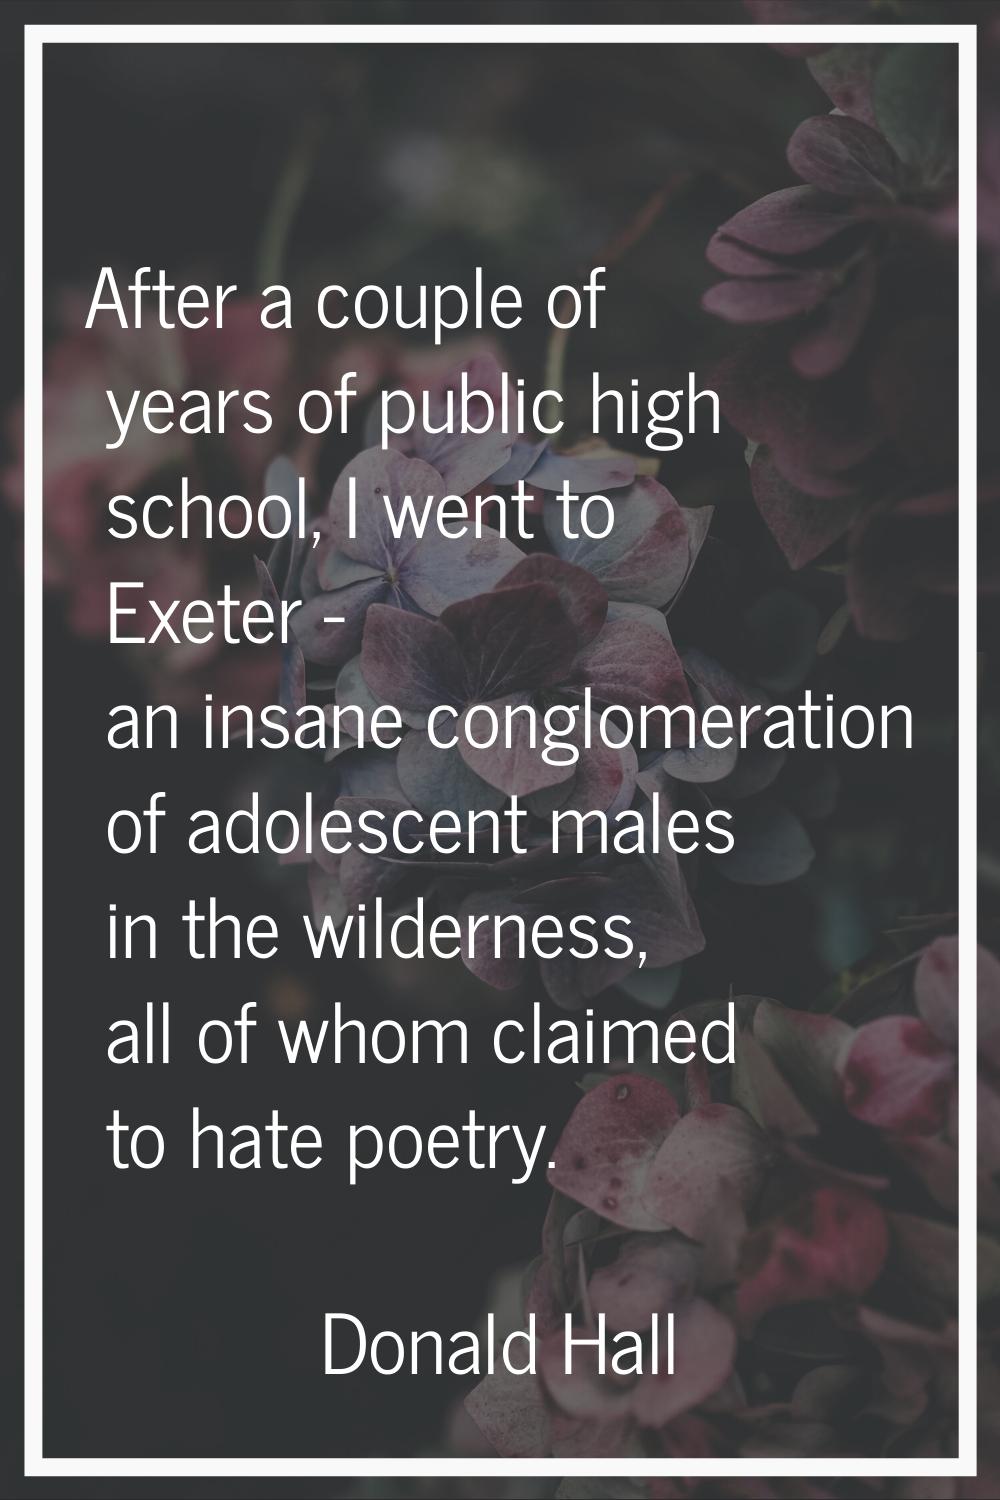 After a couple of years of public high school, I went to Exeter - an insane conglomeration of adole